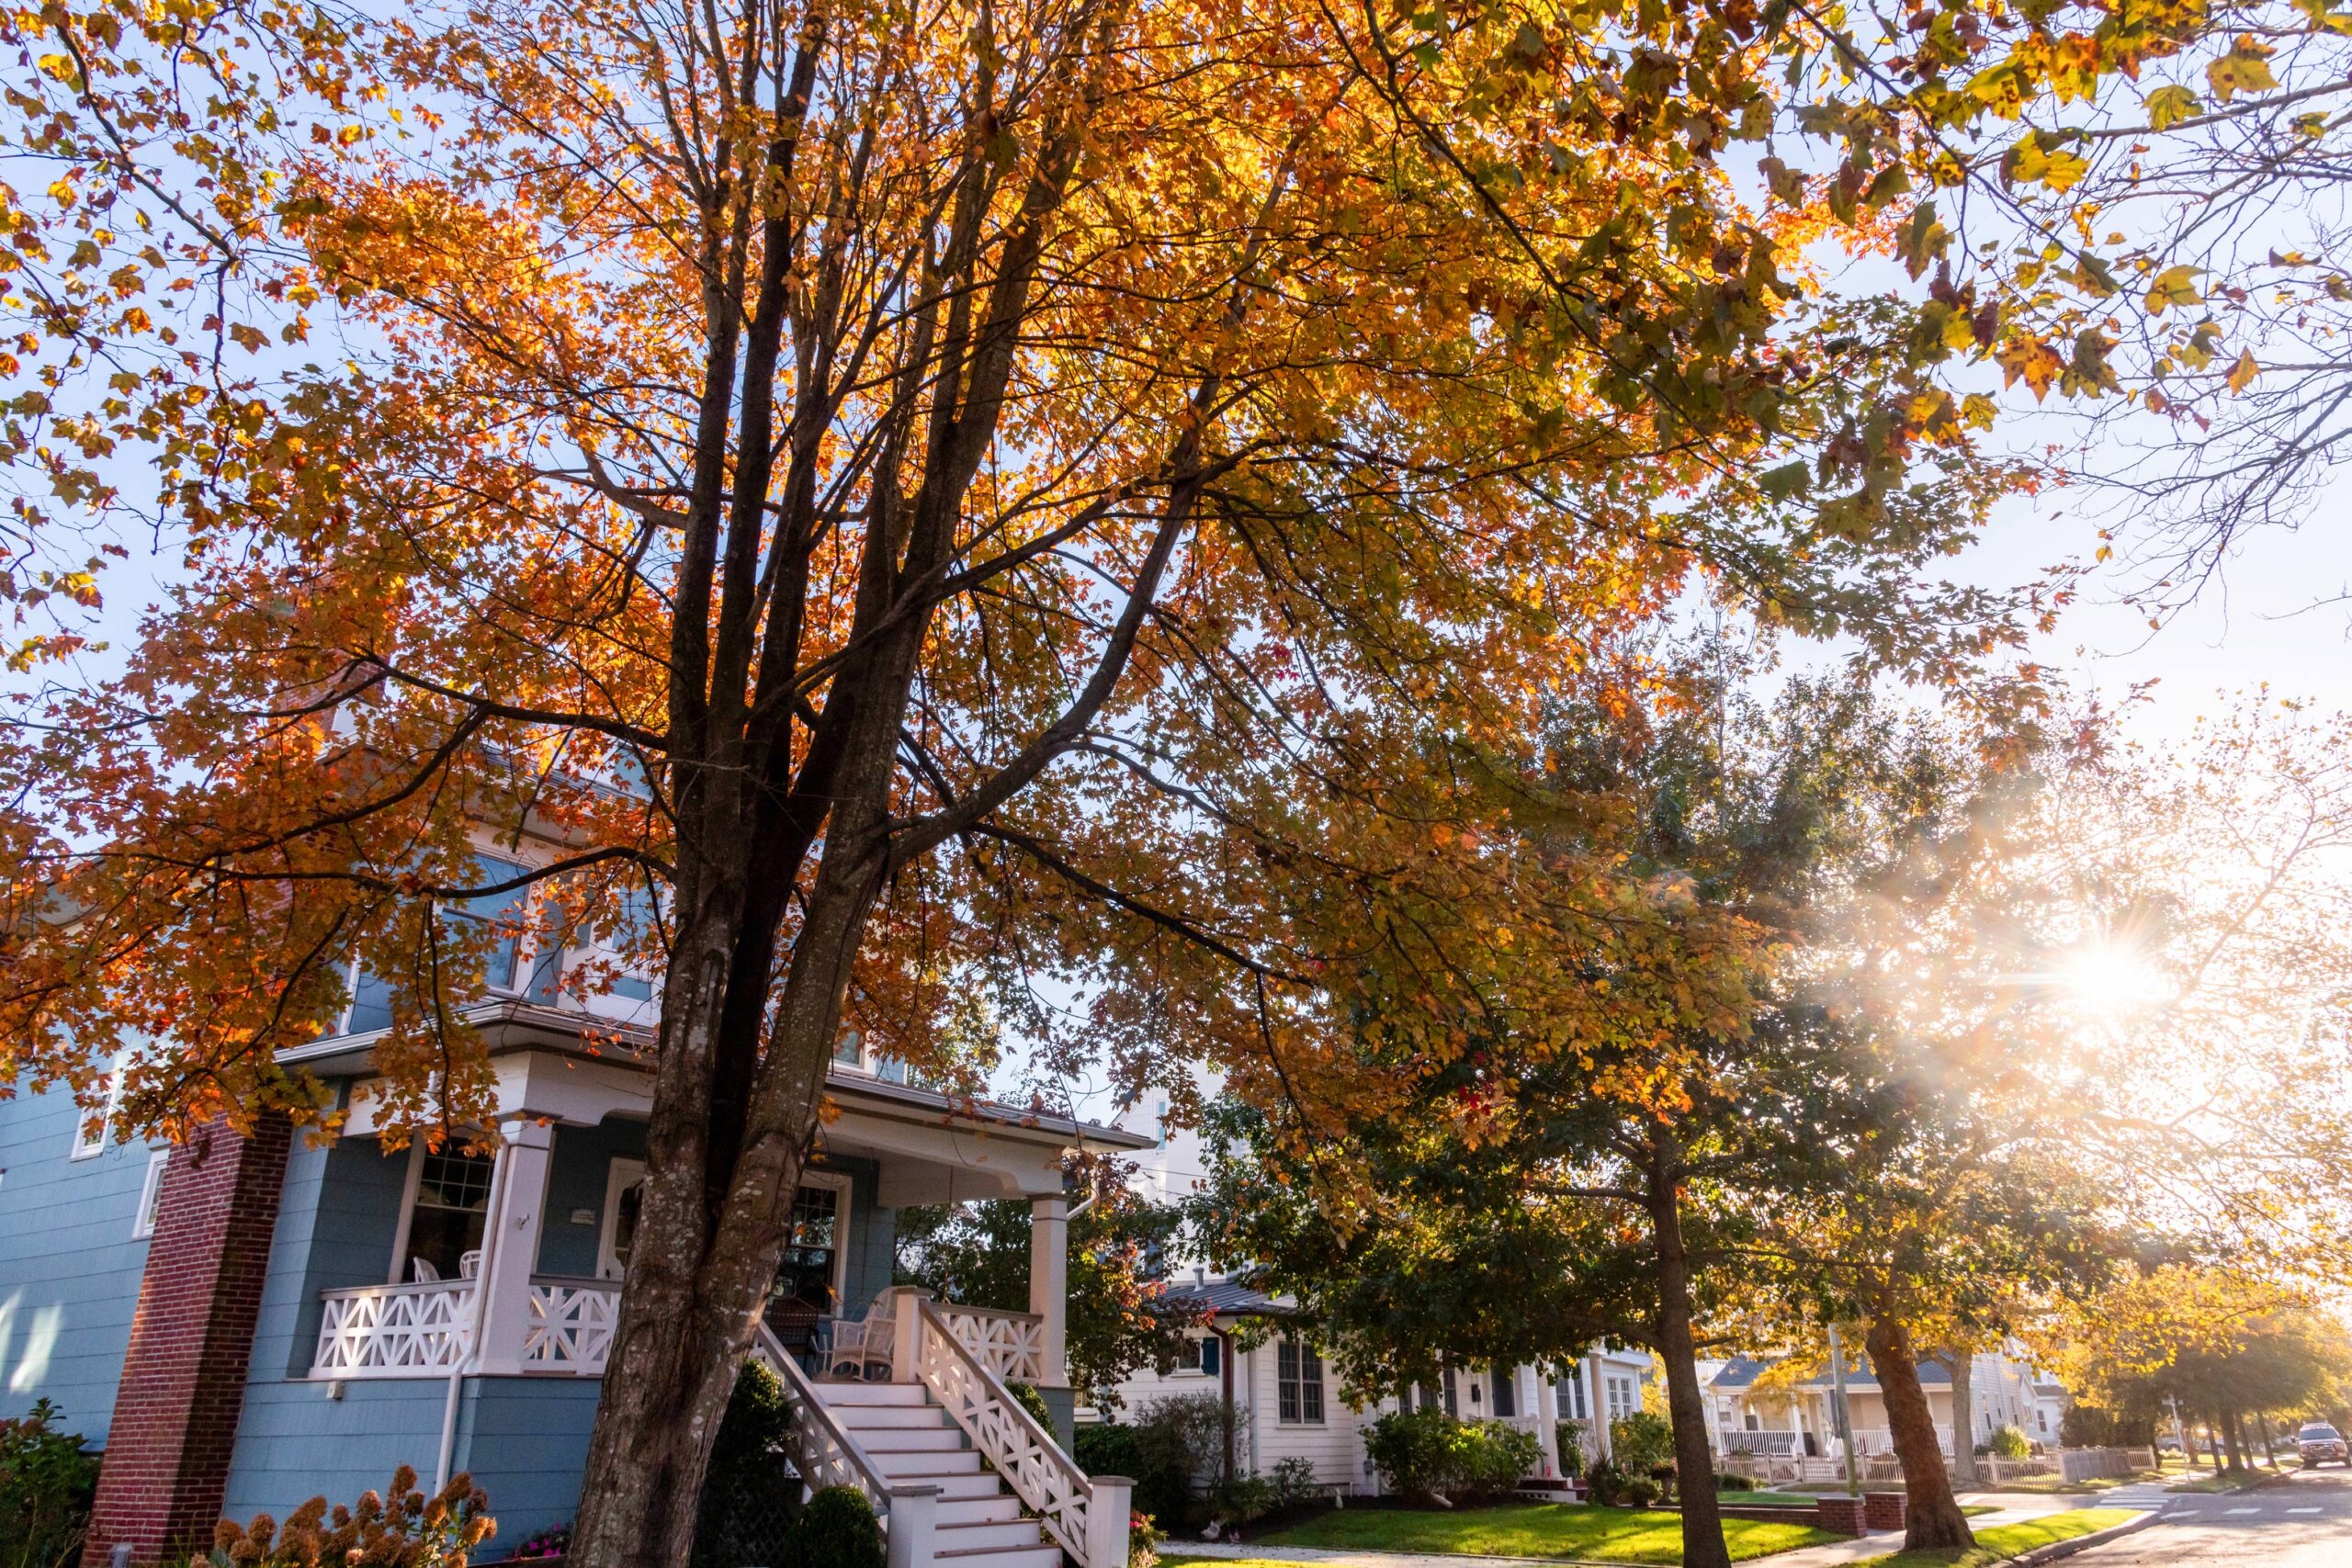 The sun shining through trees with red, yellow, and orange leaves, in front of houses on New York Ave.